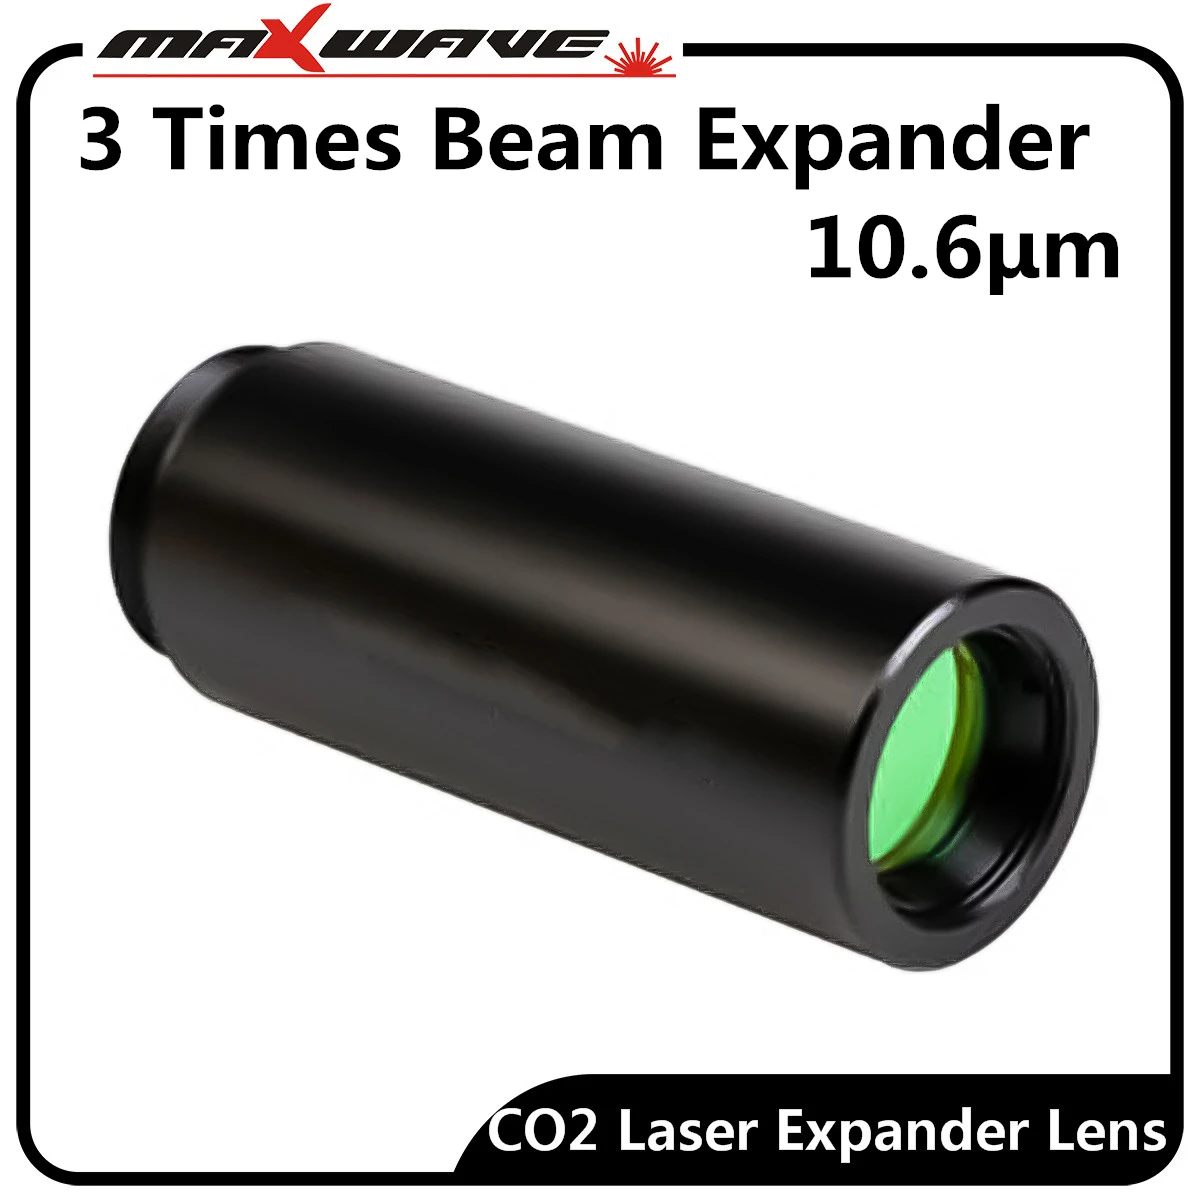 

CO2 Laser Beam Expander Lens 3X 10.6um Fixed Series 3 Times Expander Use For CO2 Laser Mark Machine